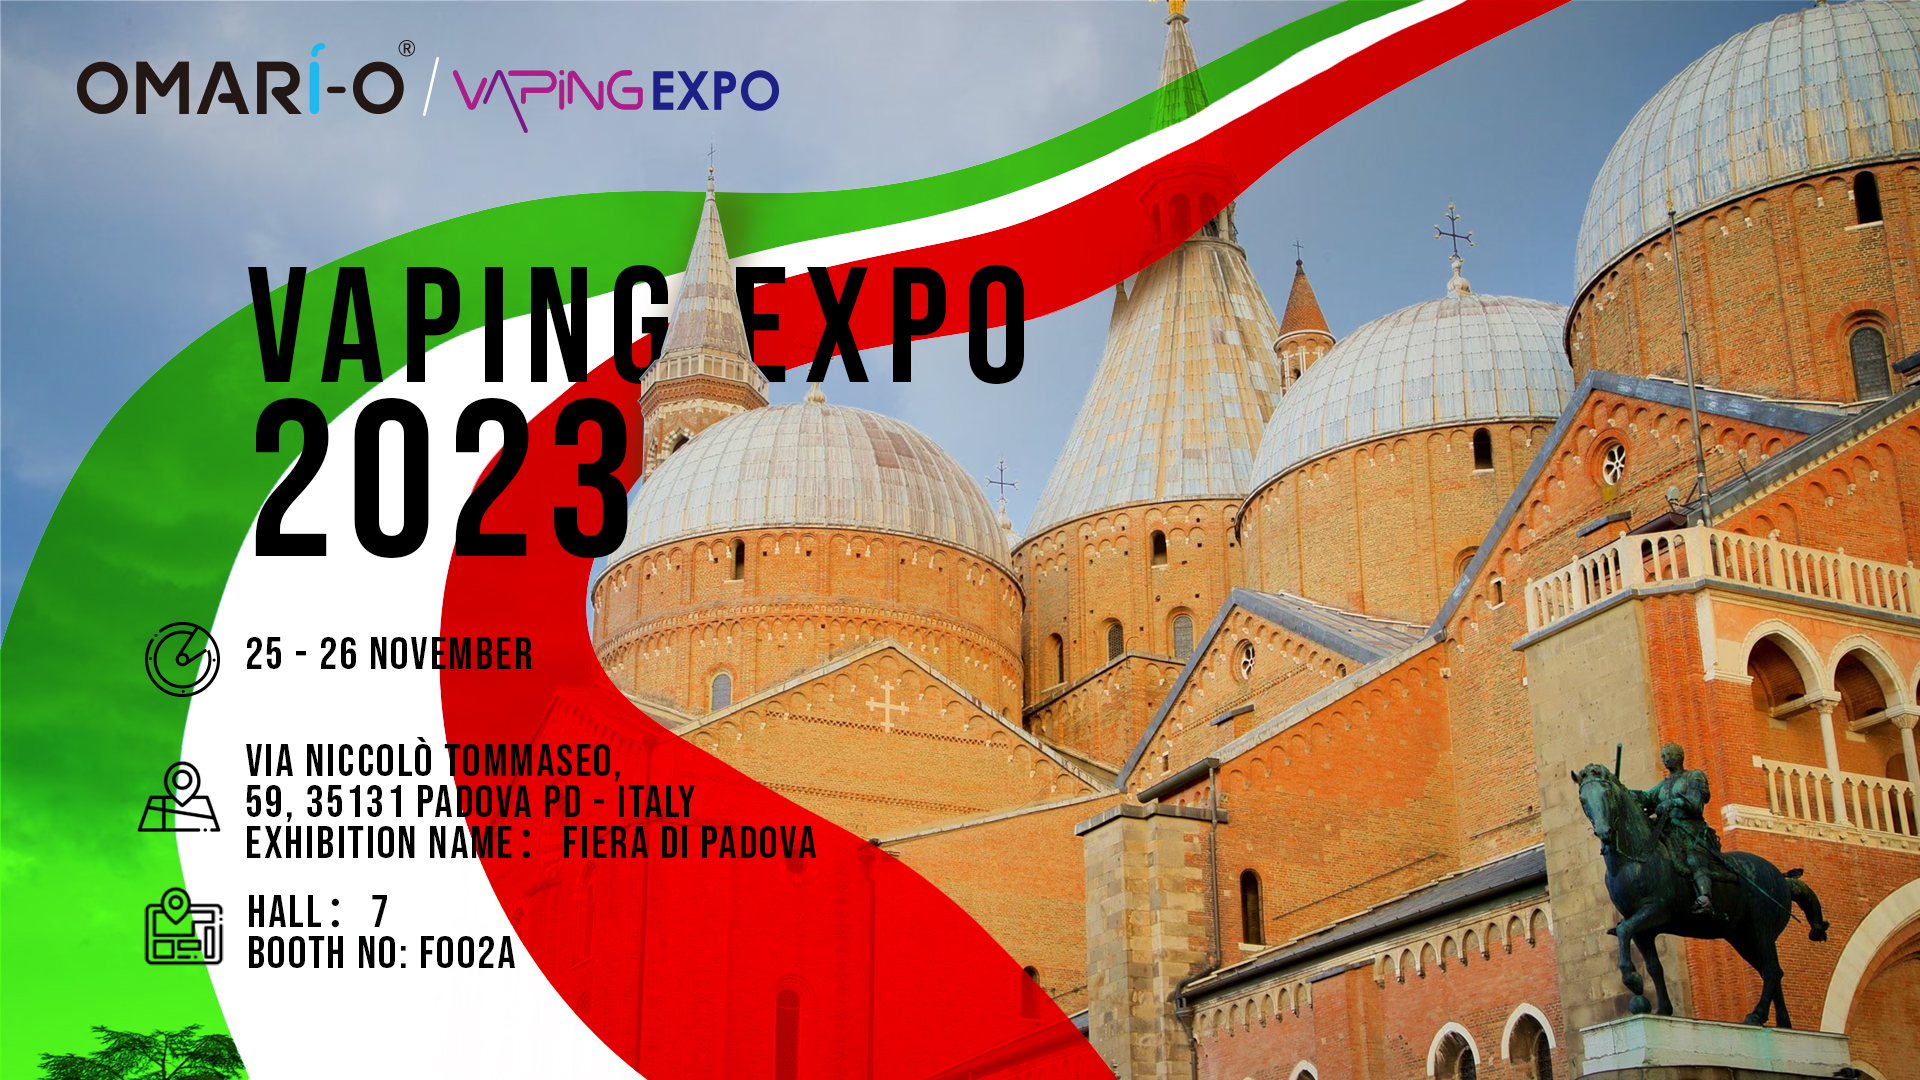 WELCOME TO 7th EDITION VAPING EXPO